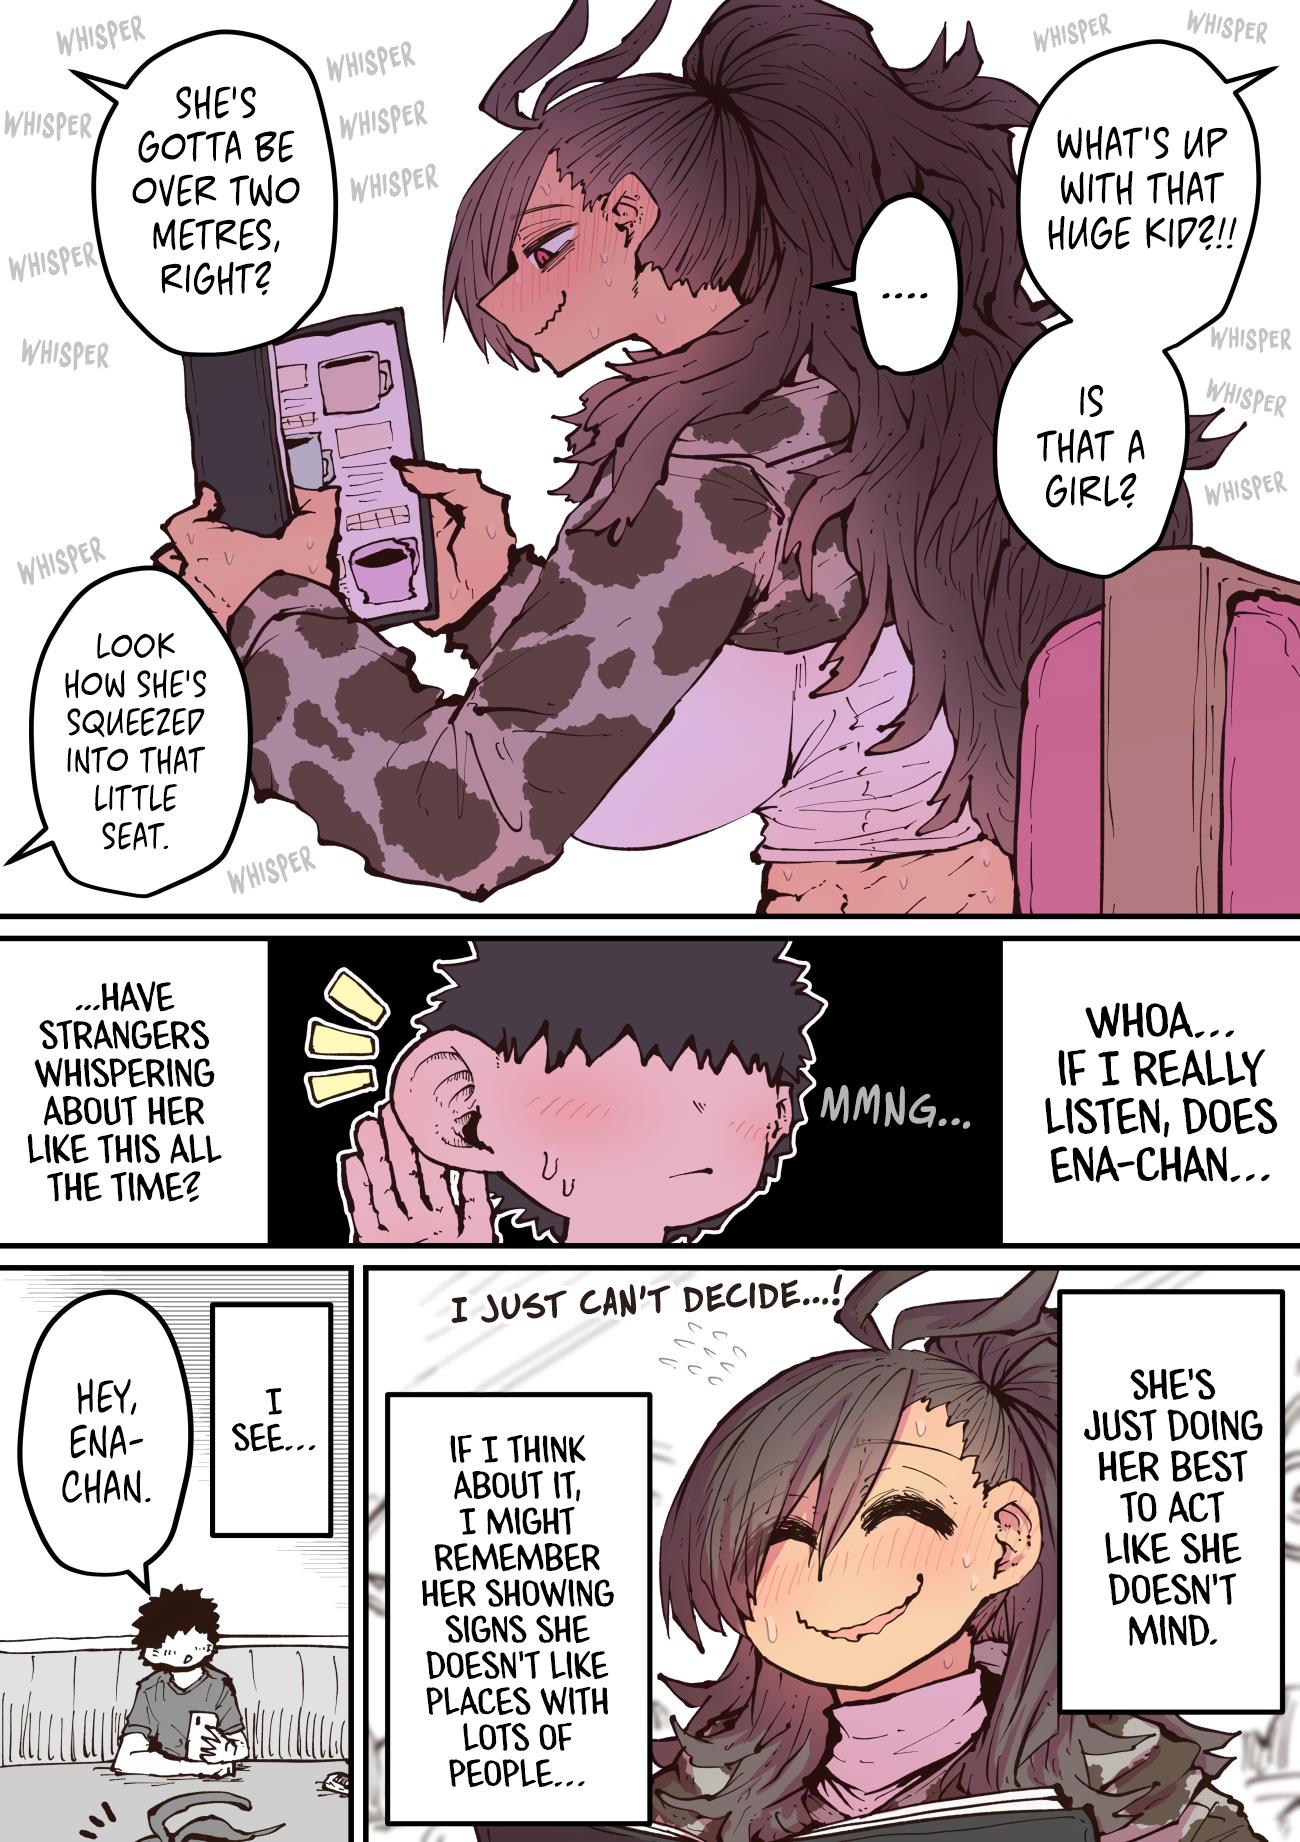 Being Targeted By Hyena-Chan - Page 2